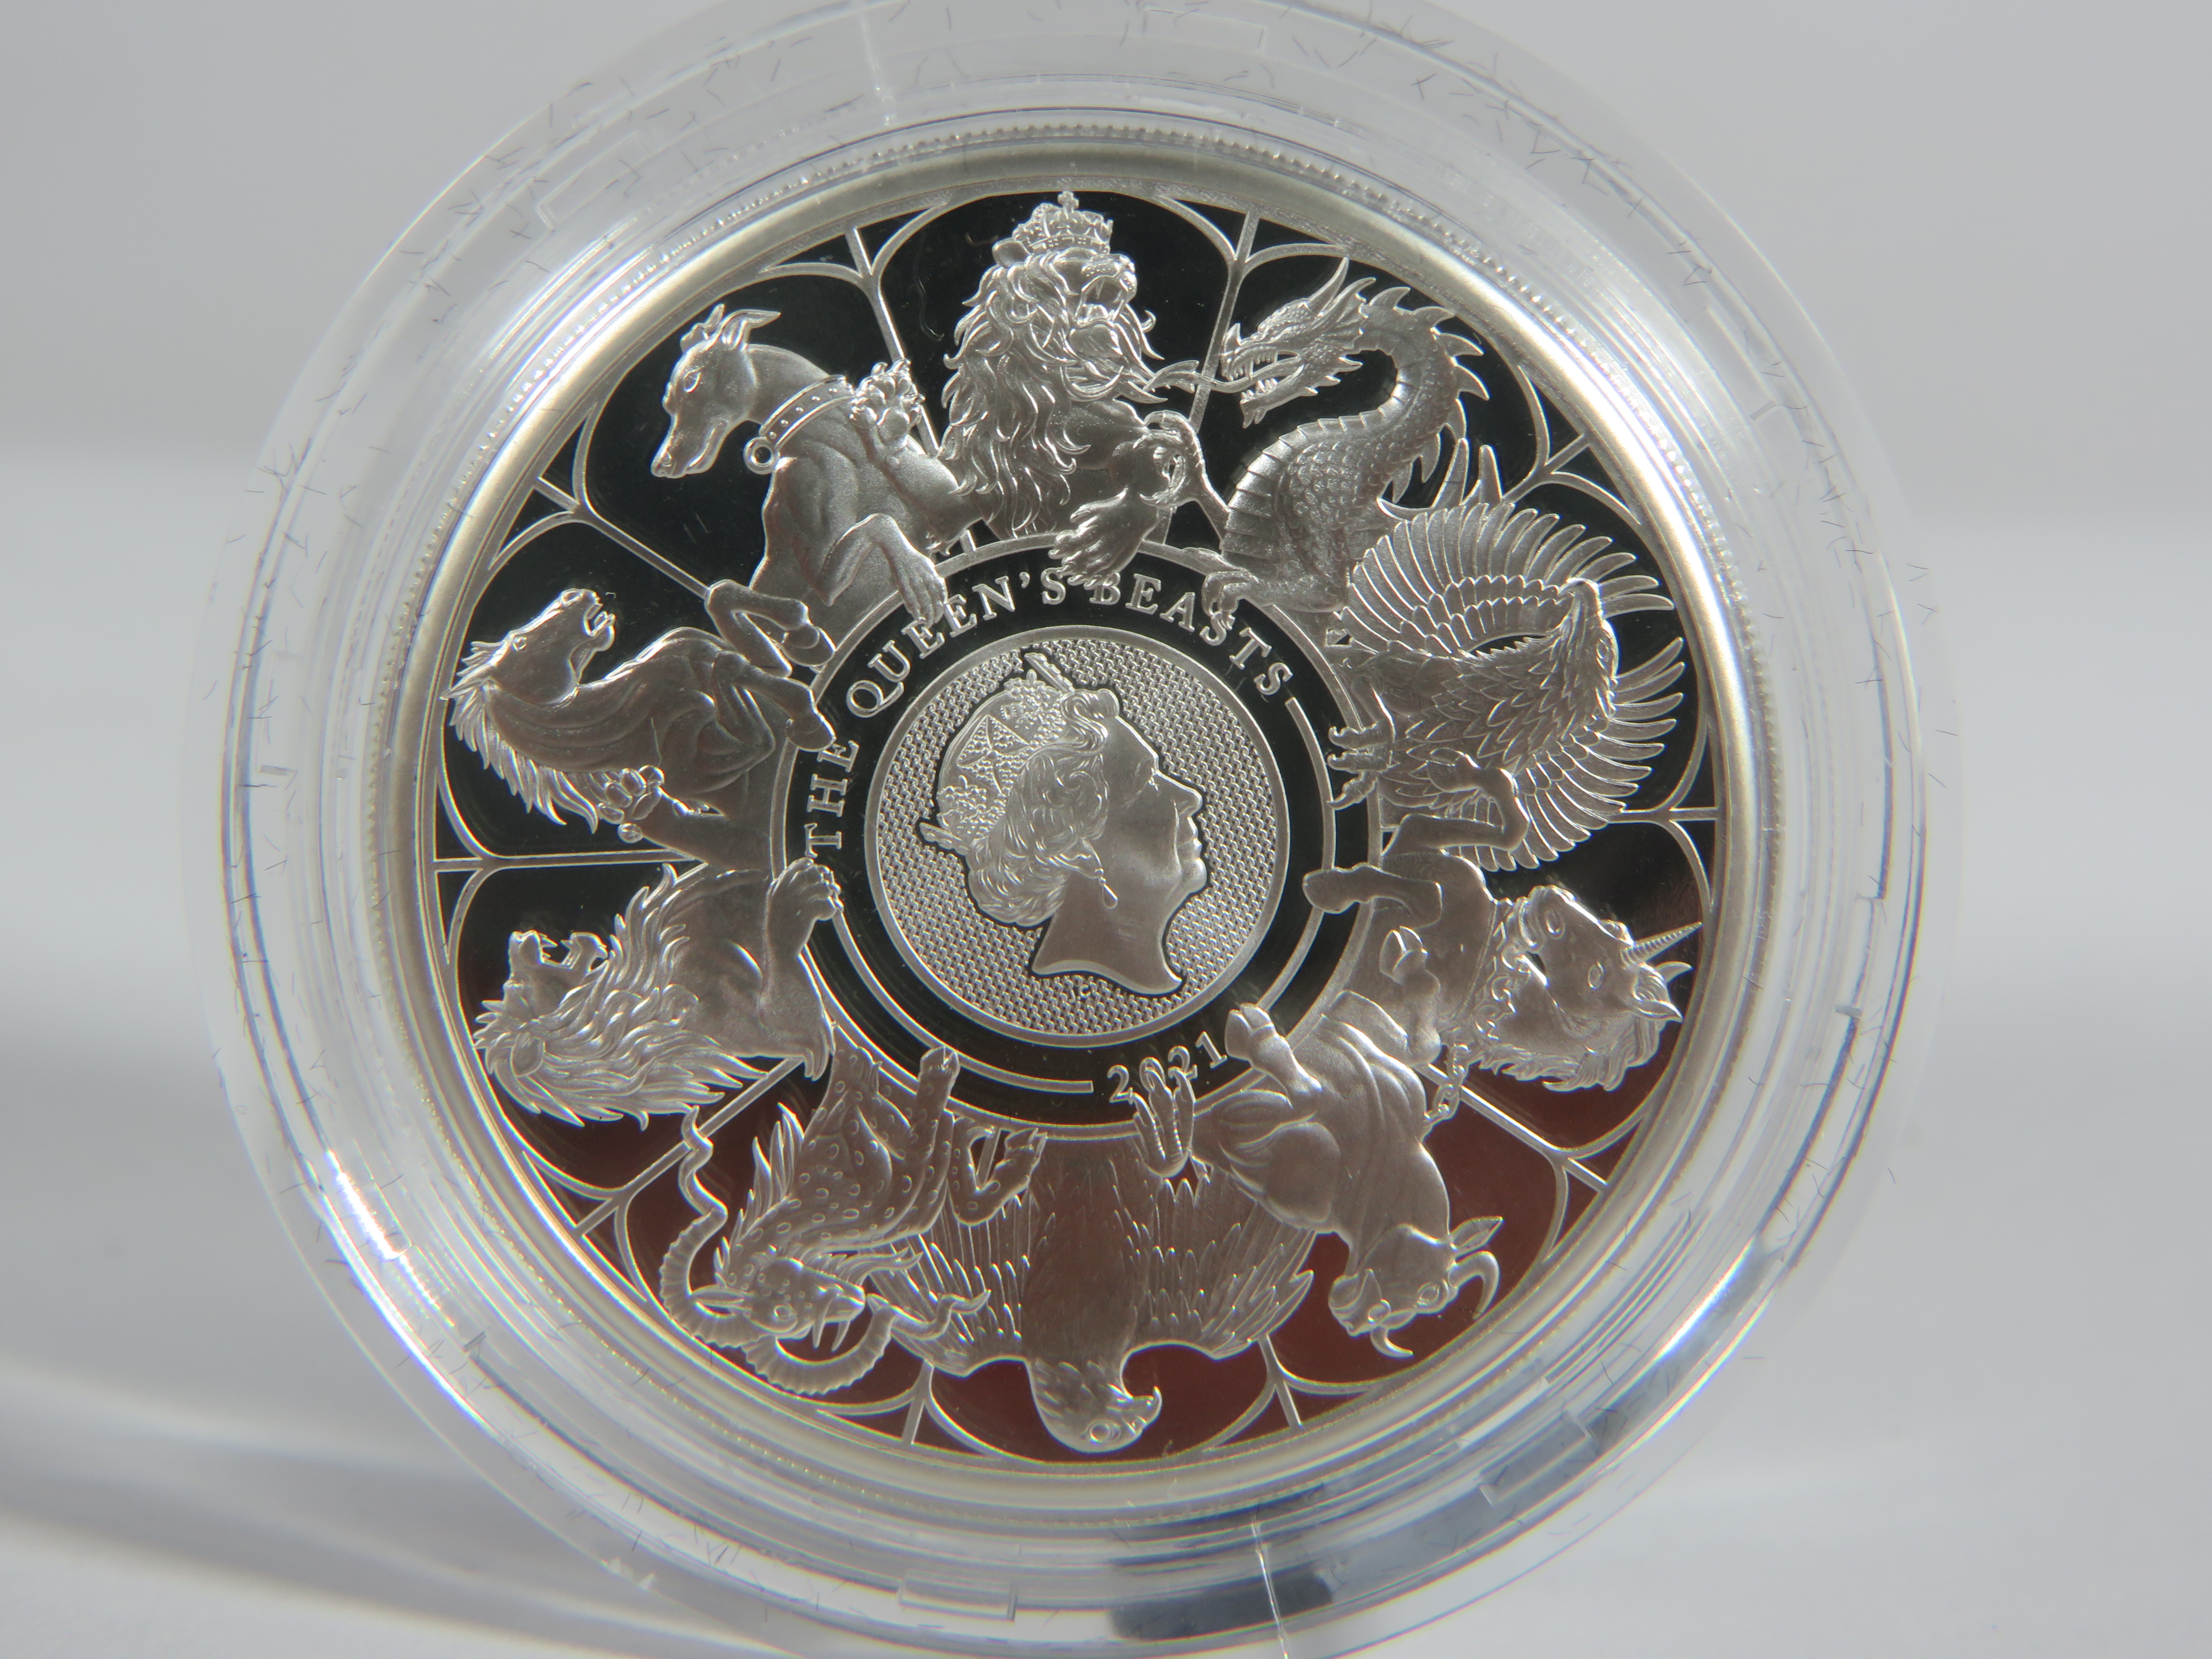 Royal Mint 2021 one ounce .999 Silver Proof Two Pound Coin to Celebrate 'The Queens Beasts'. Ltd